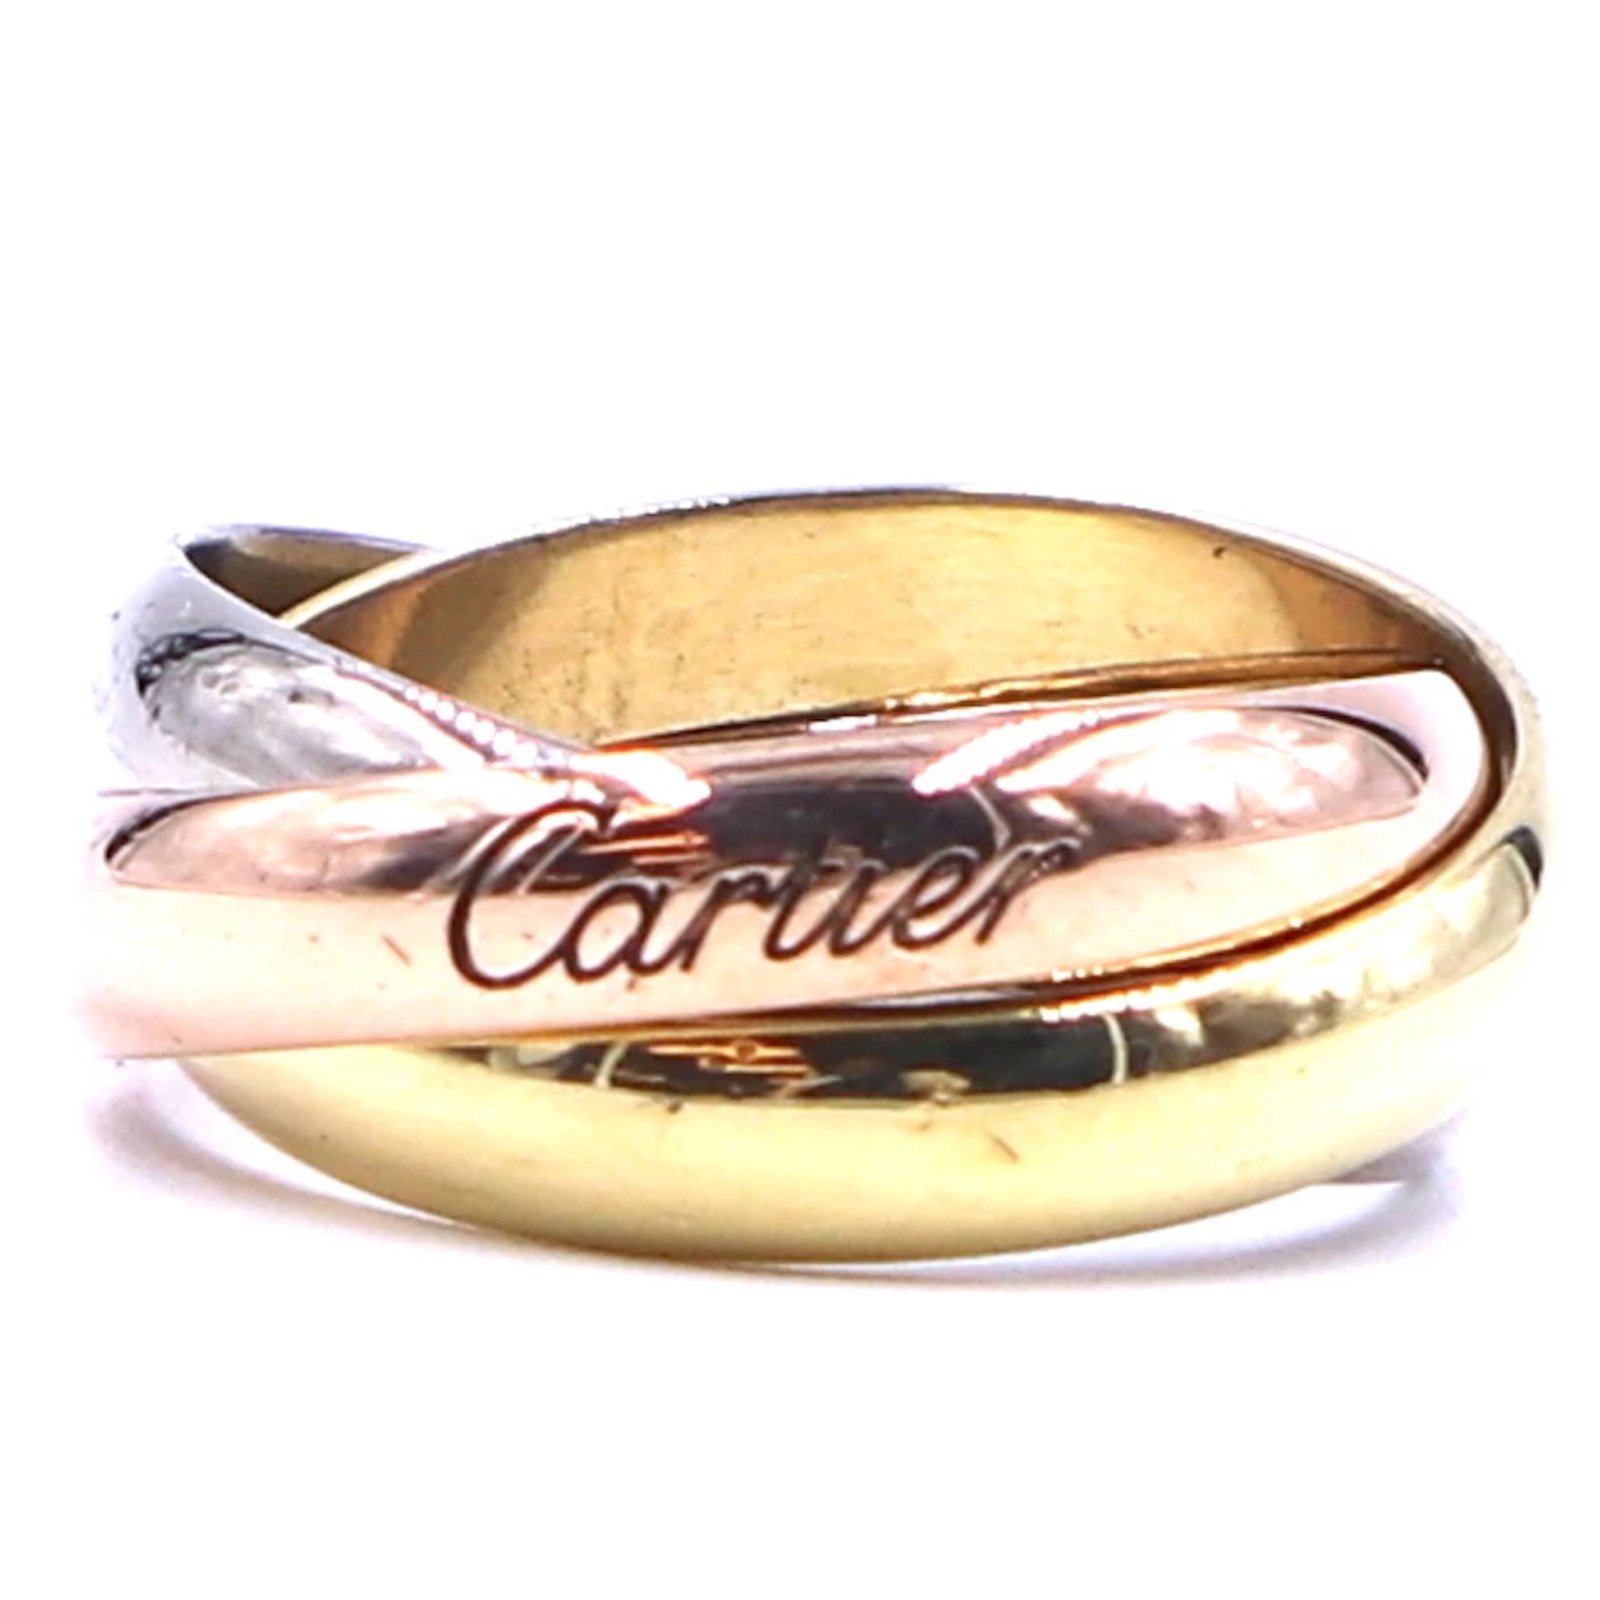 cartier ring size 52